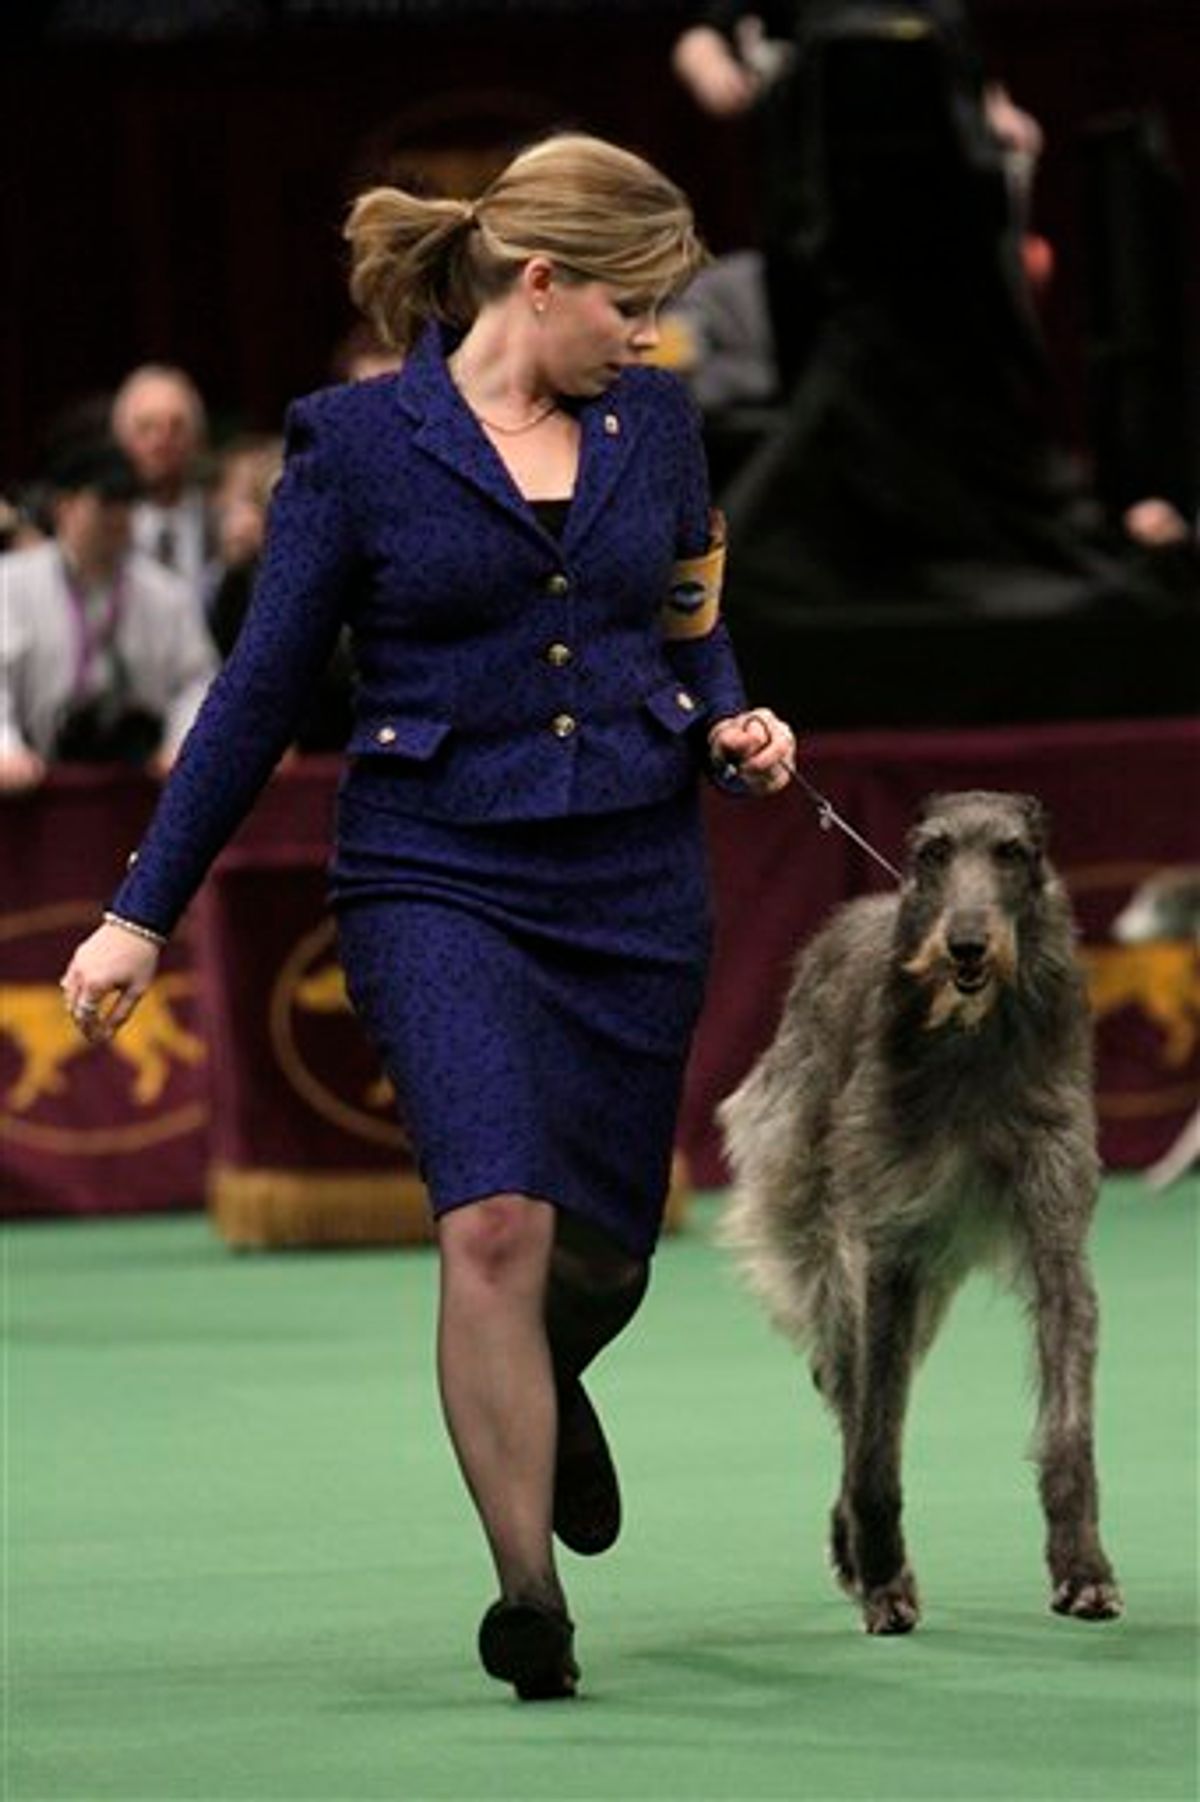 Scottish deerhound Foxcliffe Hickory Wind is led in the ring during competition at the 135th Westminster Kennel Club Dog Show on Monday, Feb. 14, 2011, at Madison Square Garden in New York. The dog won the hound division. (AP Photo/Mary Altaffer) (AP)